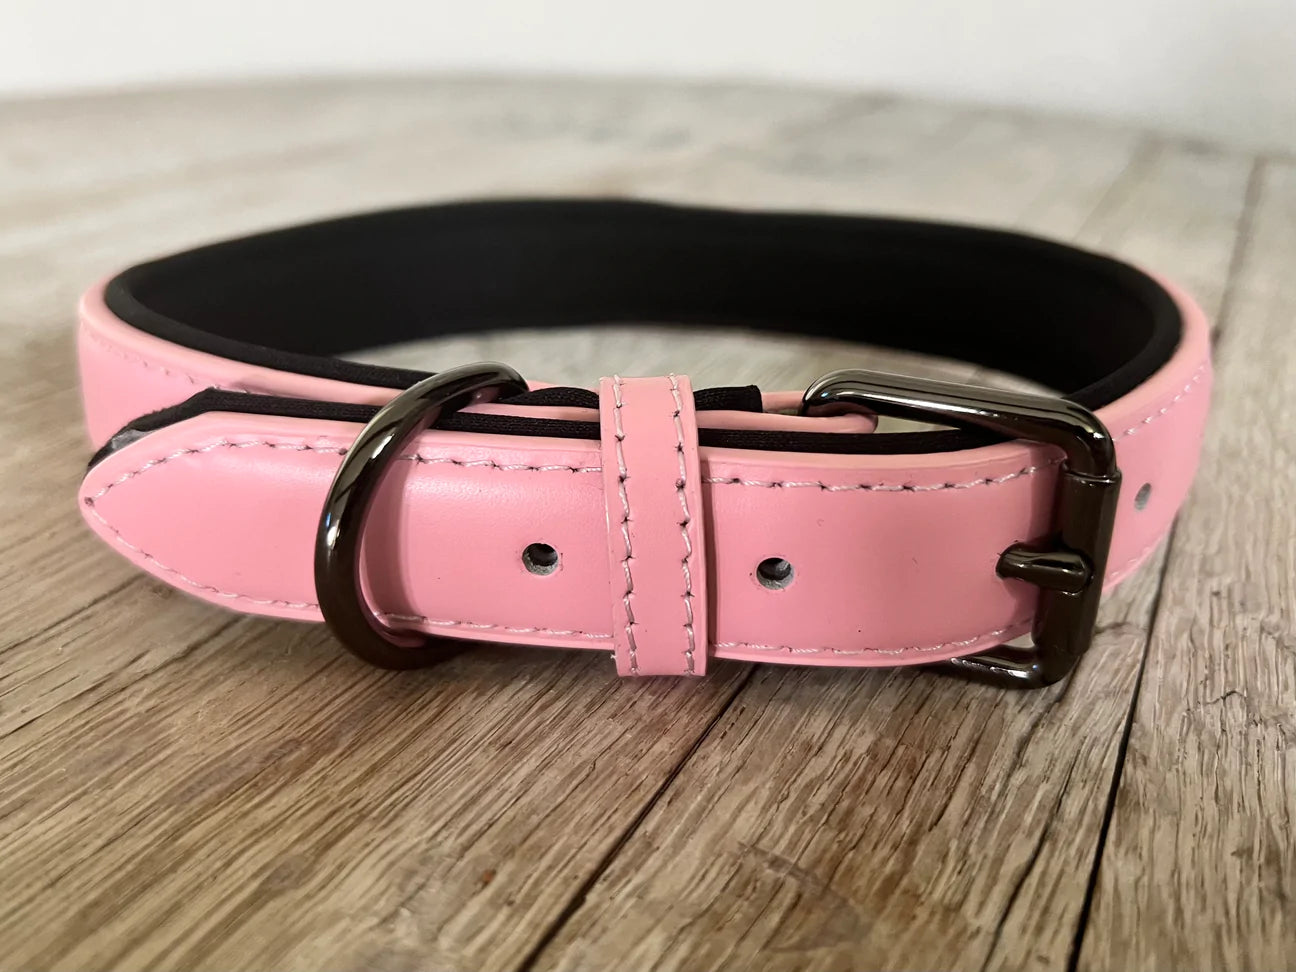 Leather Collars